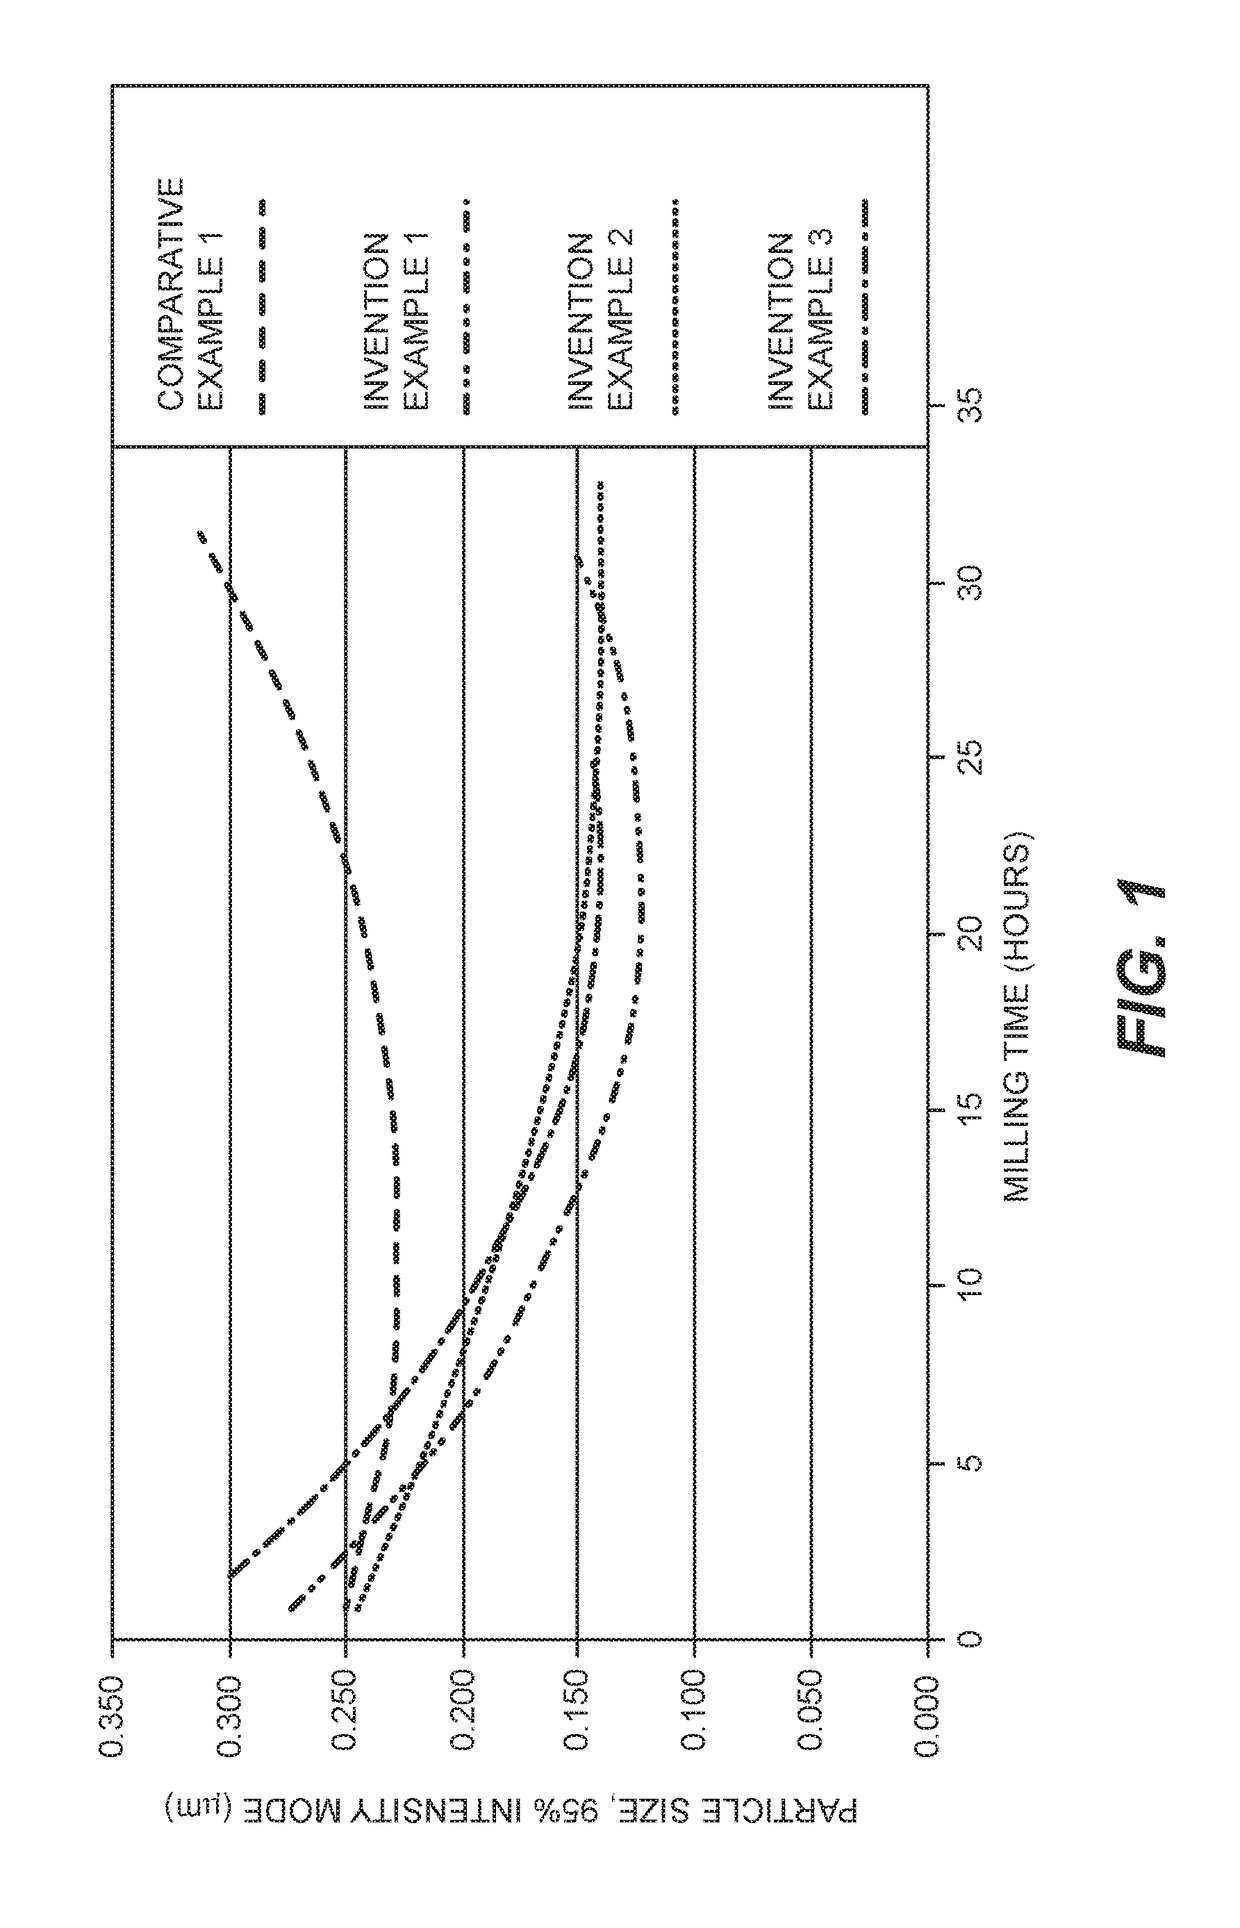 Preparation of aqueous green inkjet compositions